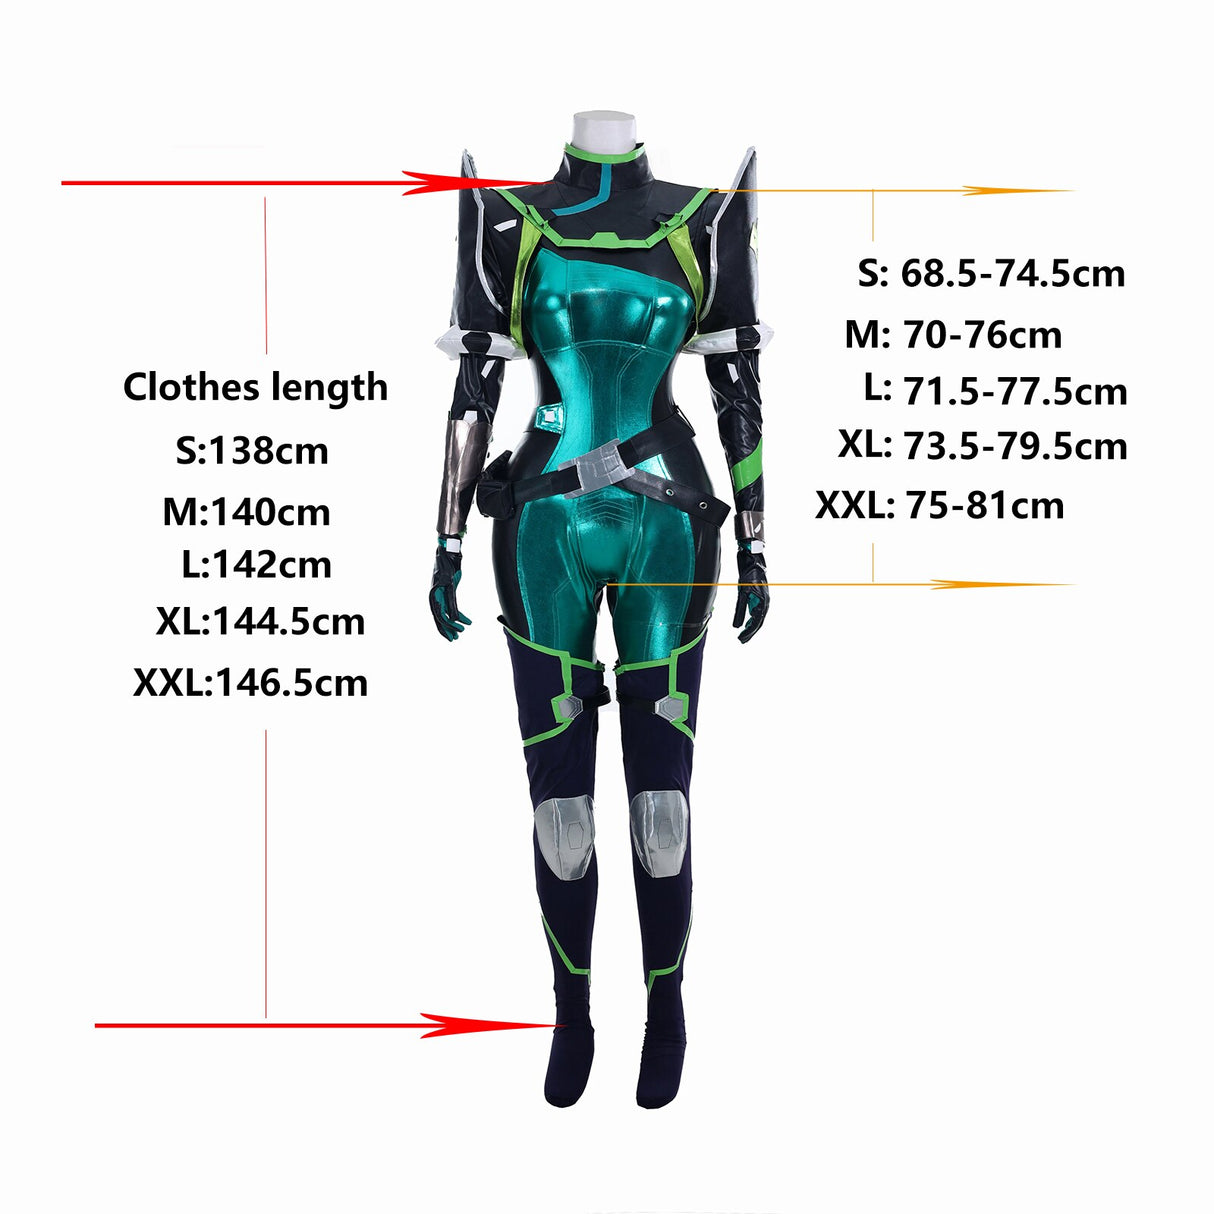 ROLECOS Viper Cosplay Costume Game Valorant Viper Cosplay Costume Green Women Combat Uniform Halloween Party Outfit Pre-sale, everythinganimee